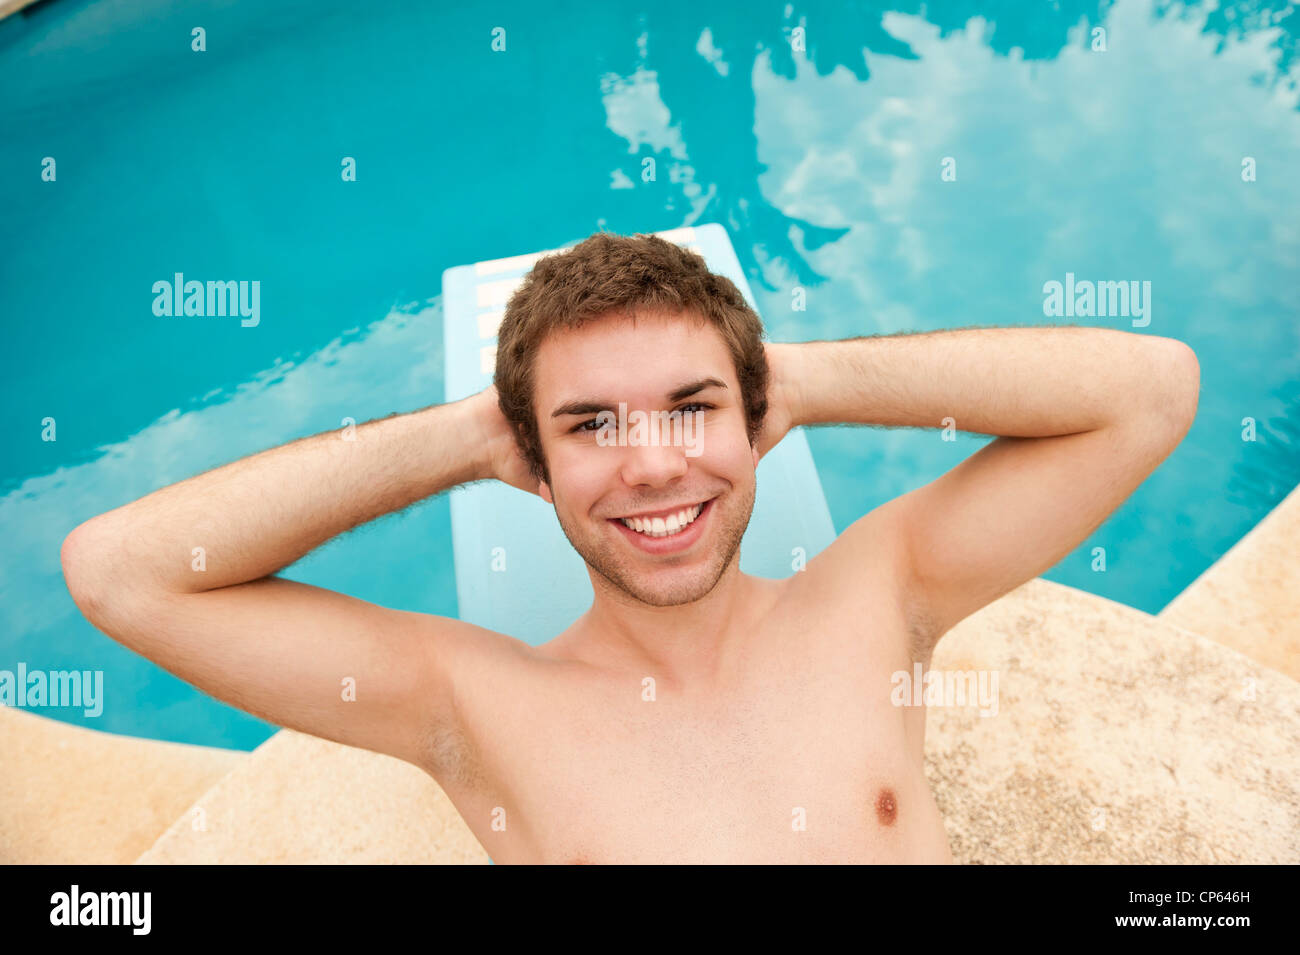 Spain, Mallorca, Young man lying on diving board, smiling, portrait Stock Photo